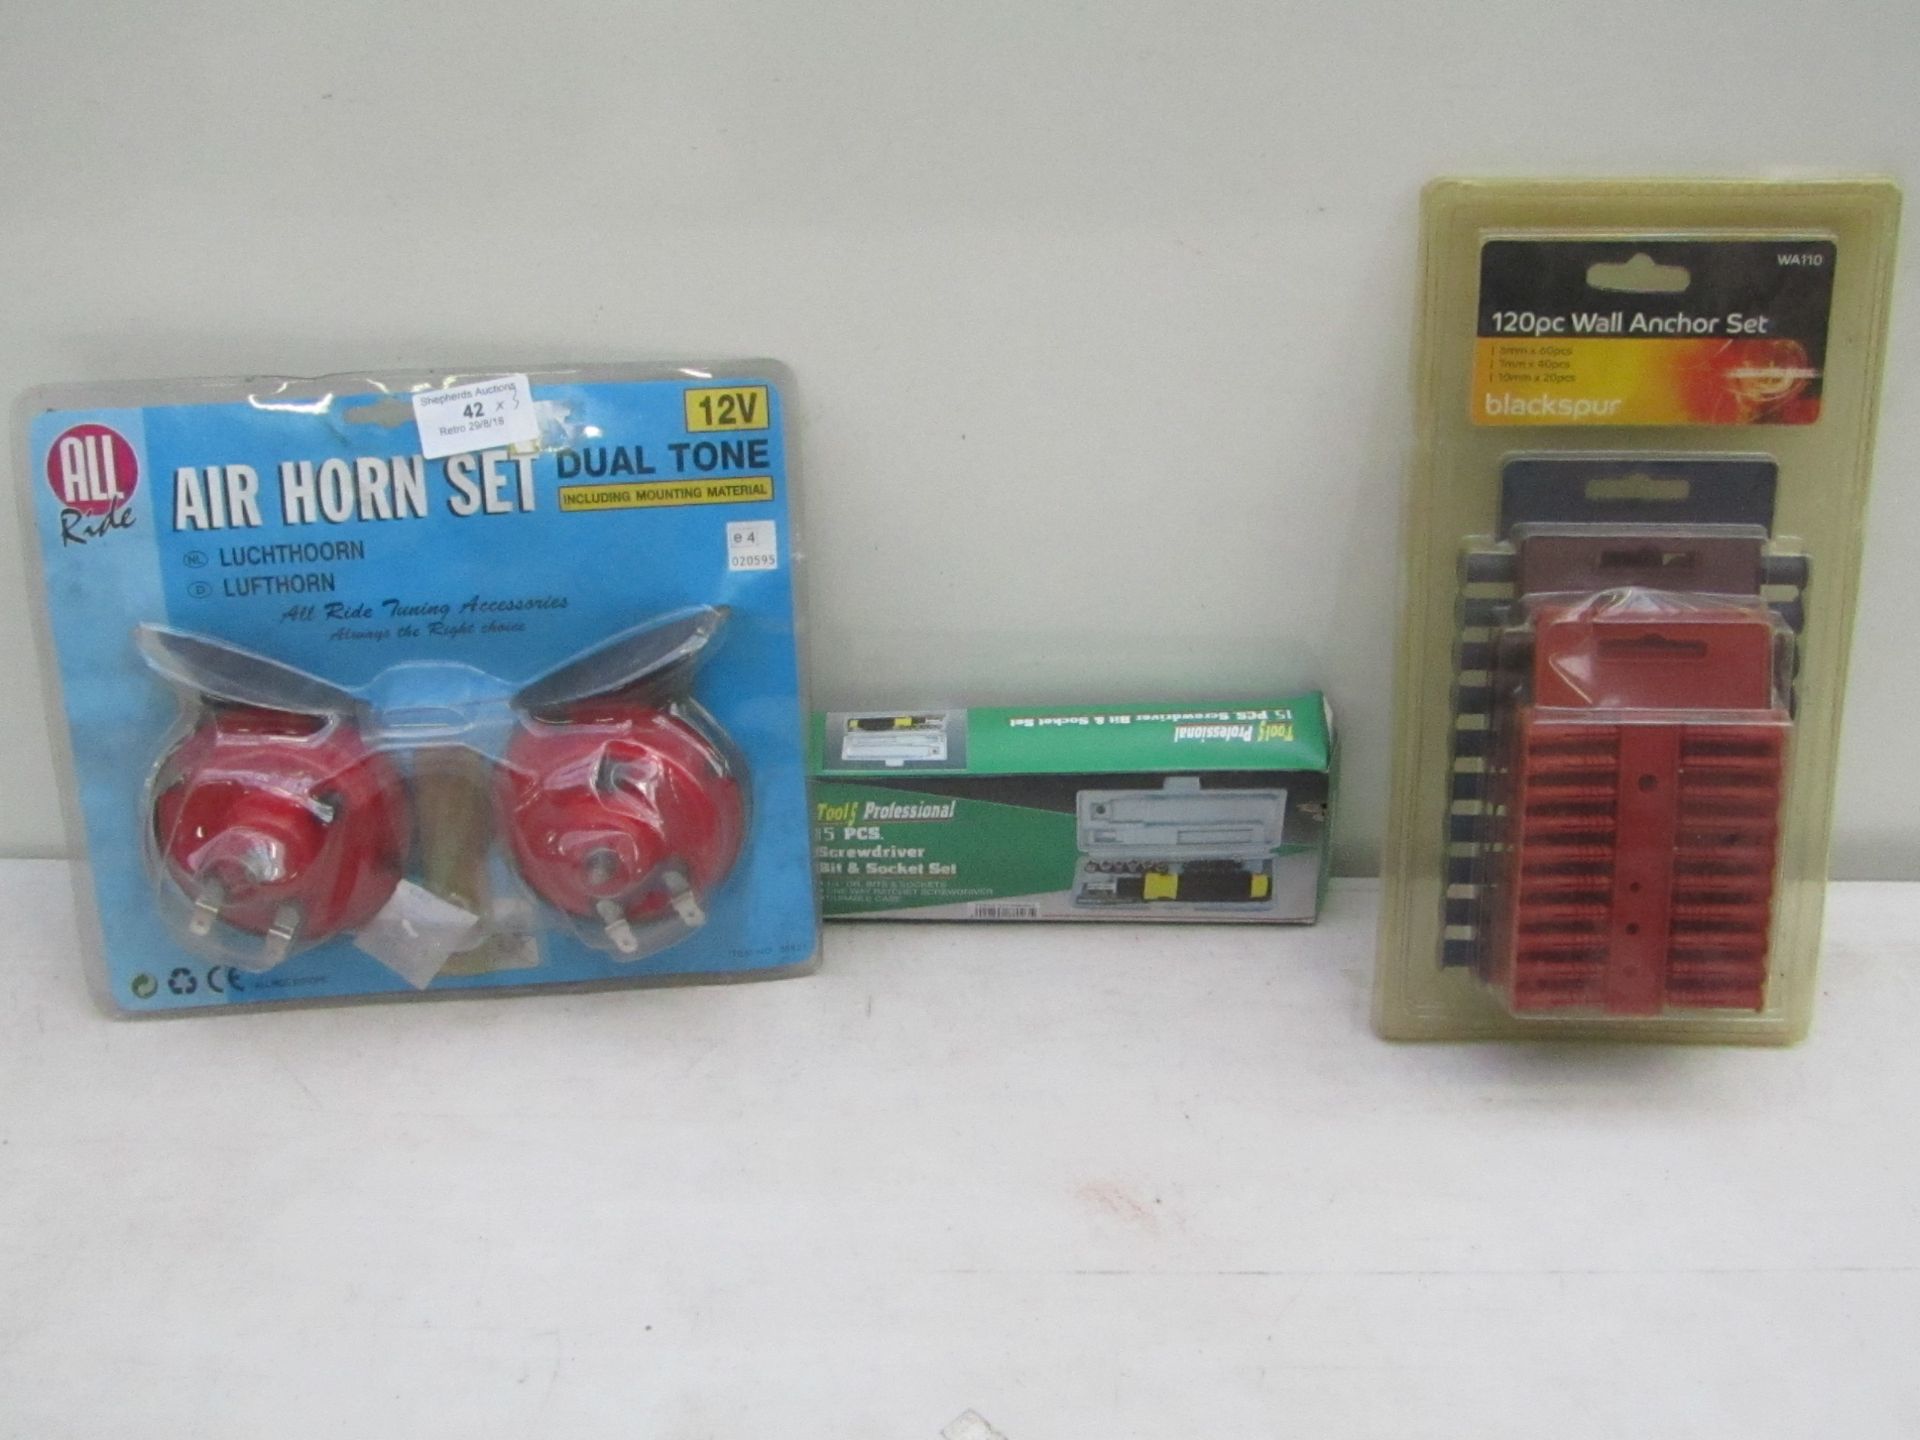 3x Items being; Tools professional 15pc bit & socket set, Air horn set and 120pc wall anchor set,